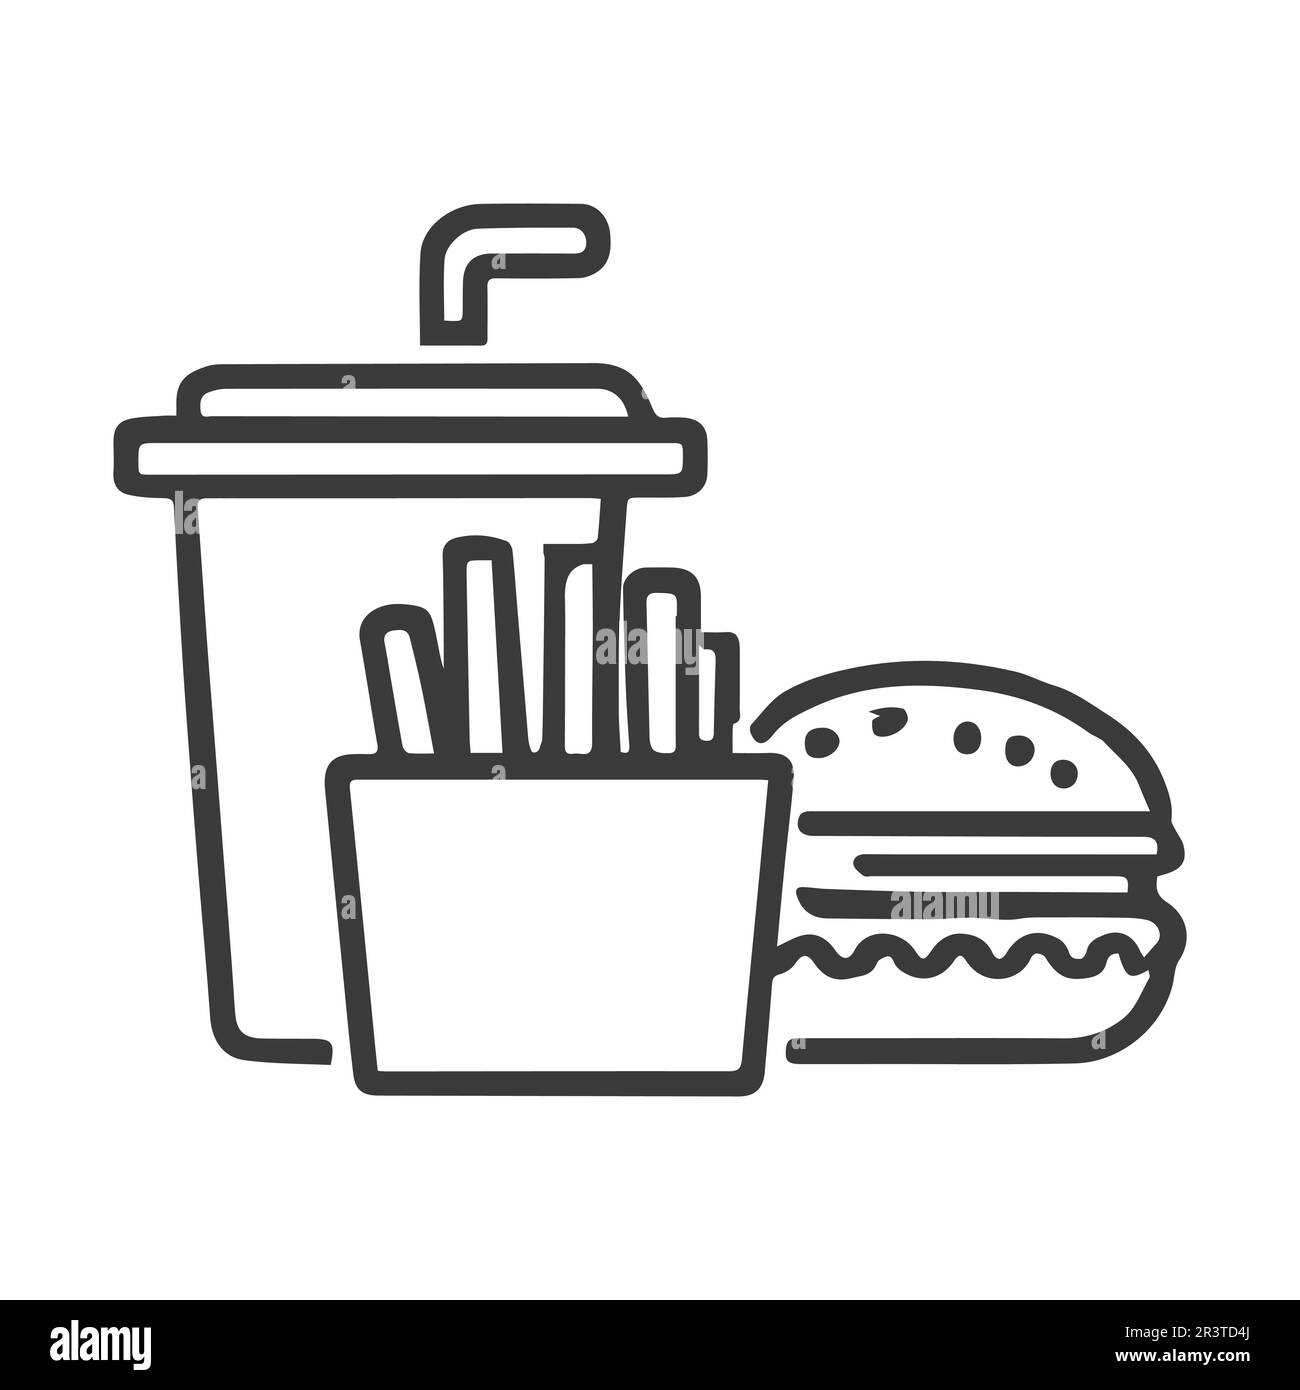 Fast food icon. Hamburger, french fries and soft drink glass, Symbols of street food. Restaurant concept. Flat design on white background. Stock Vector